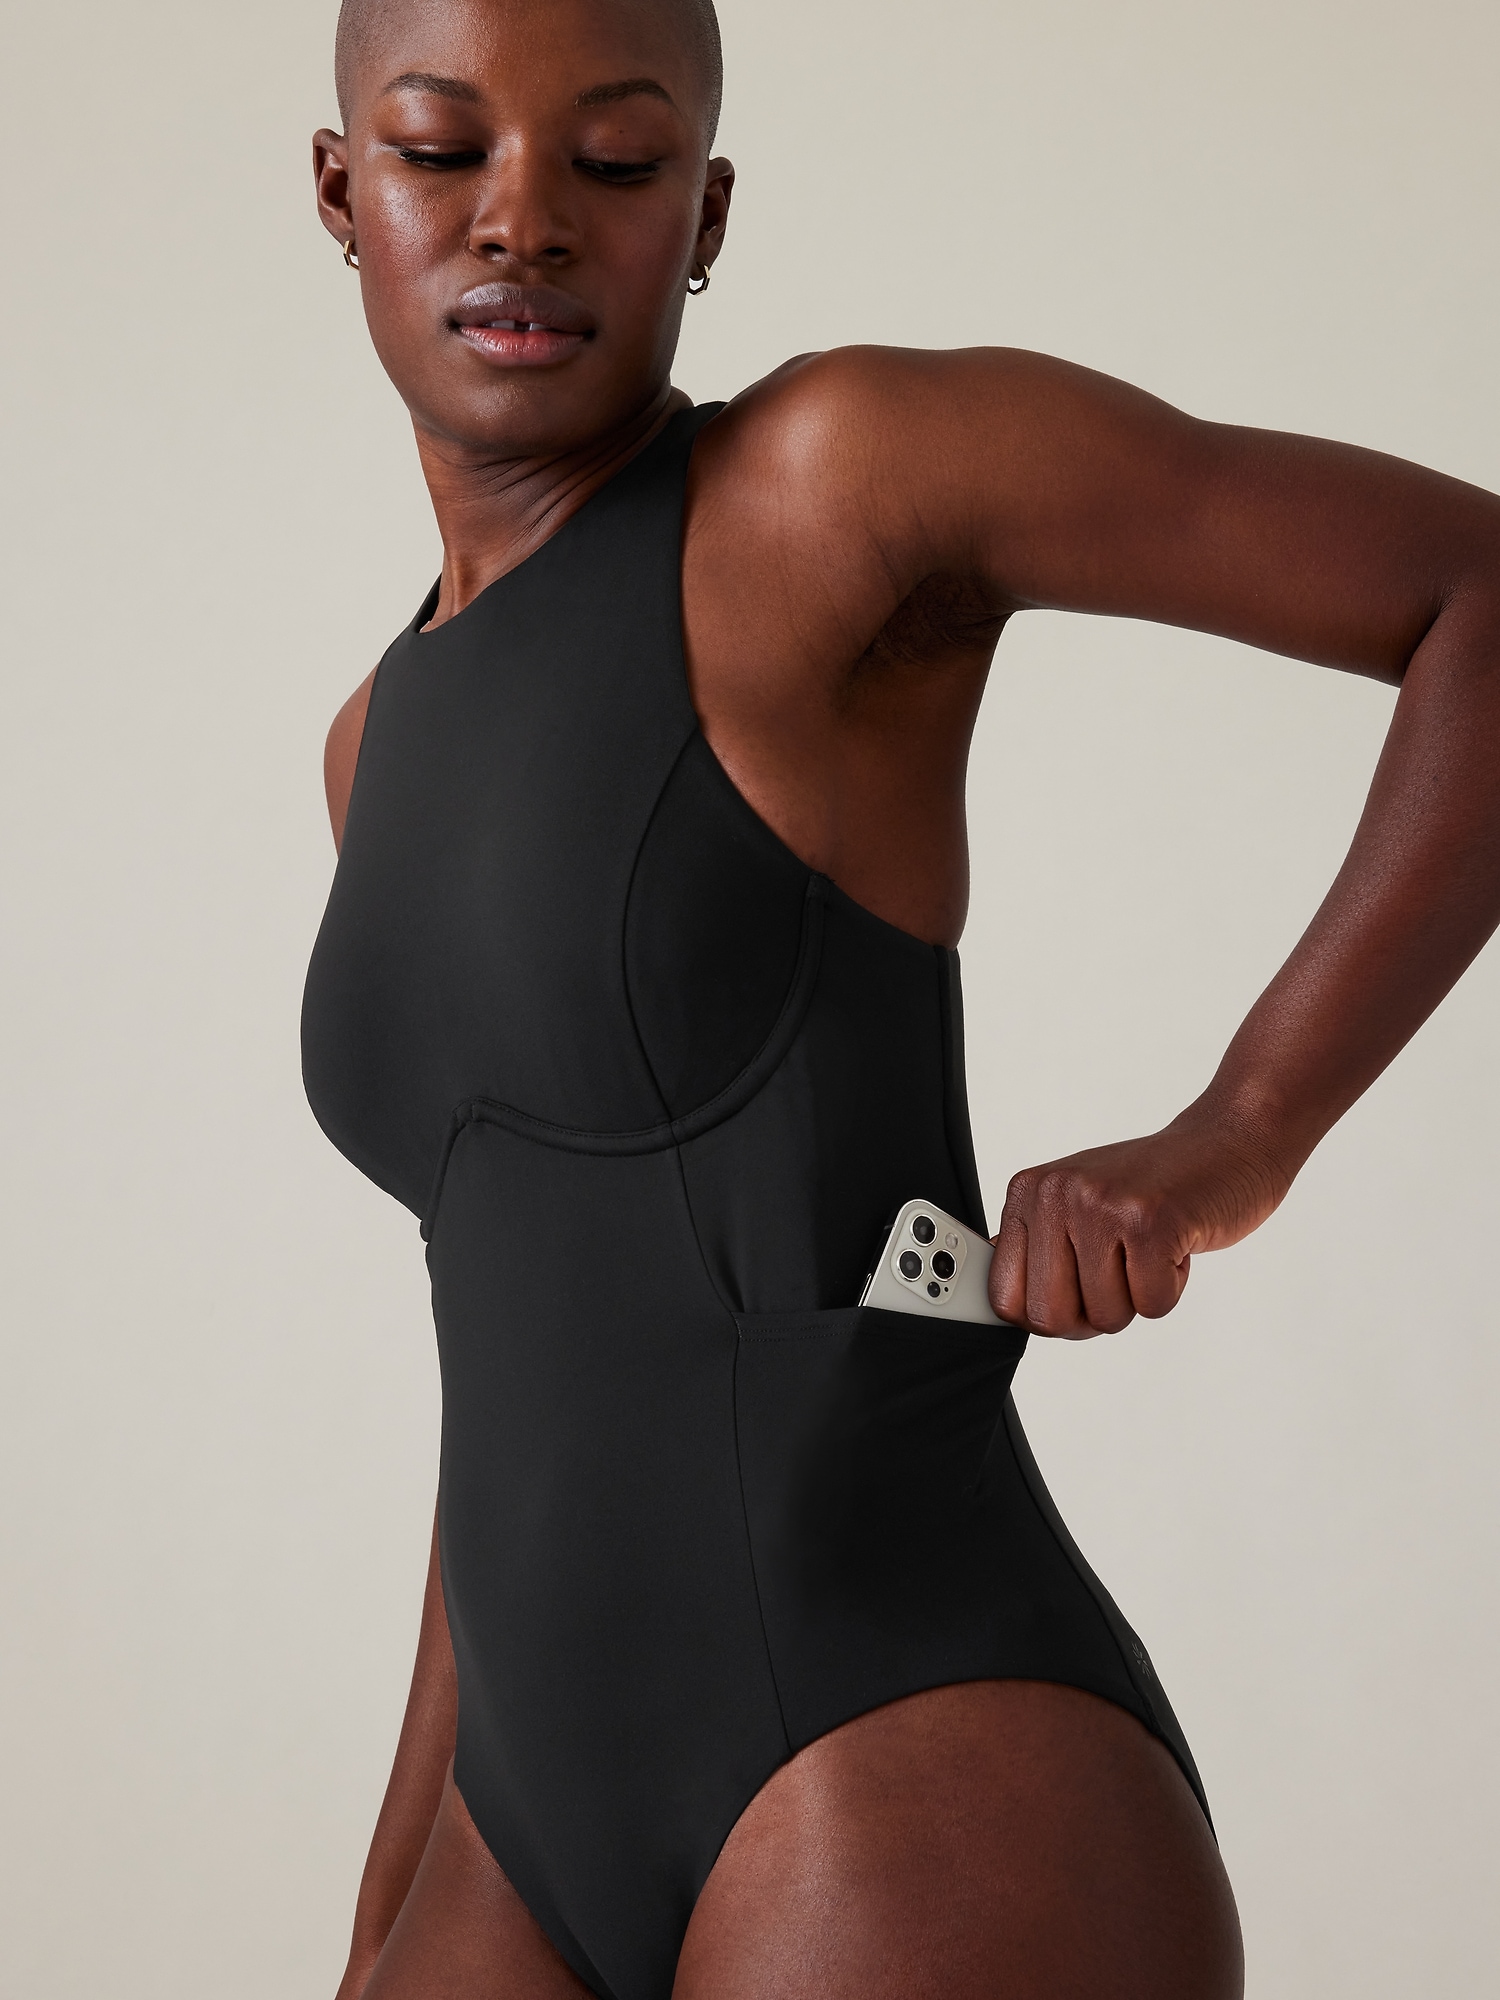 Where can I get sports swimsuits that have concealed underwire and